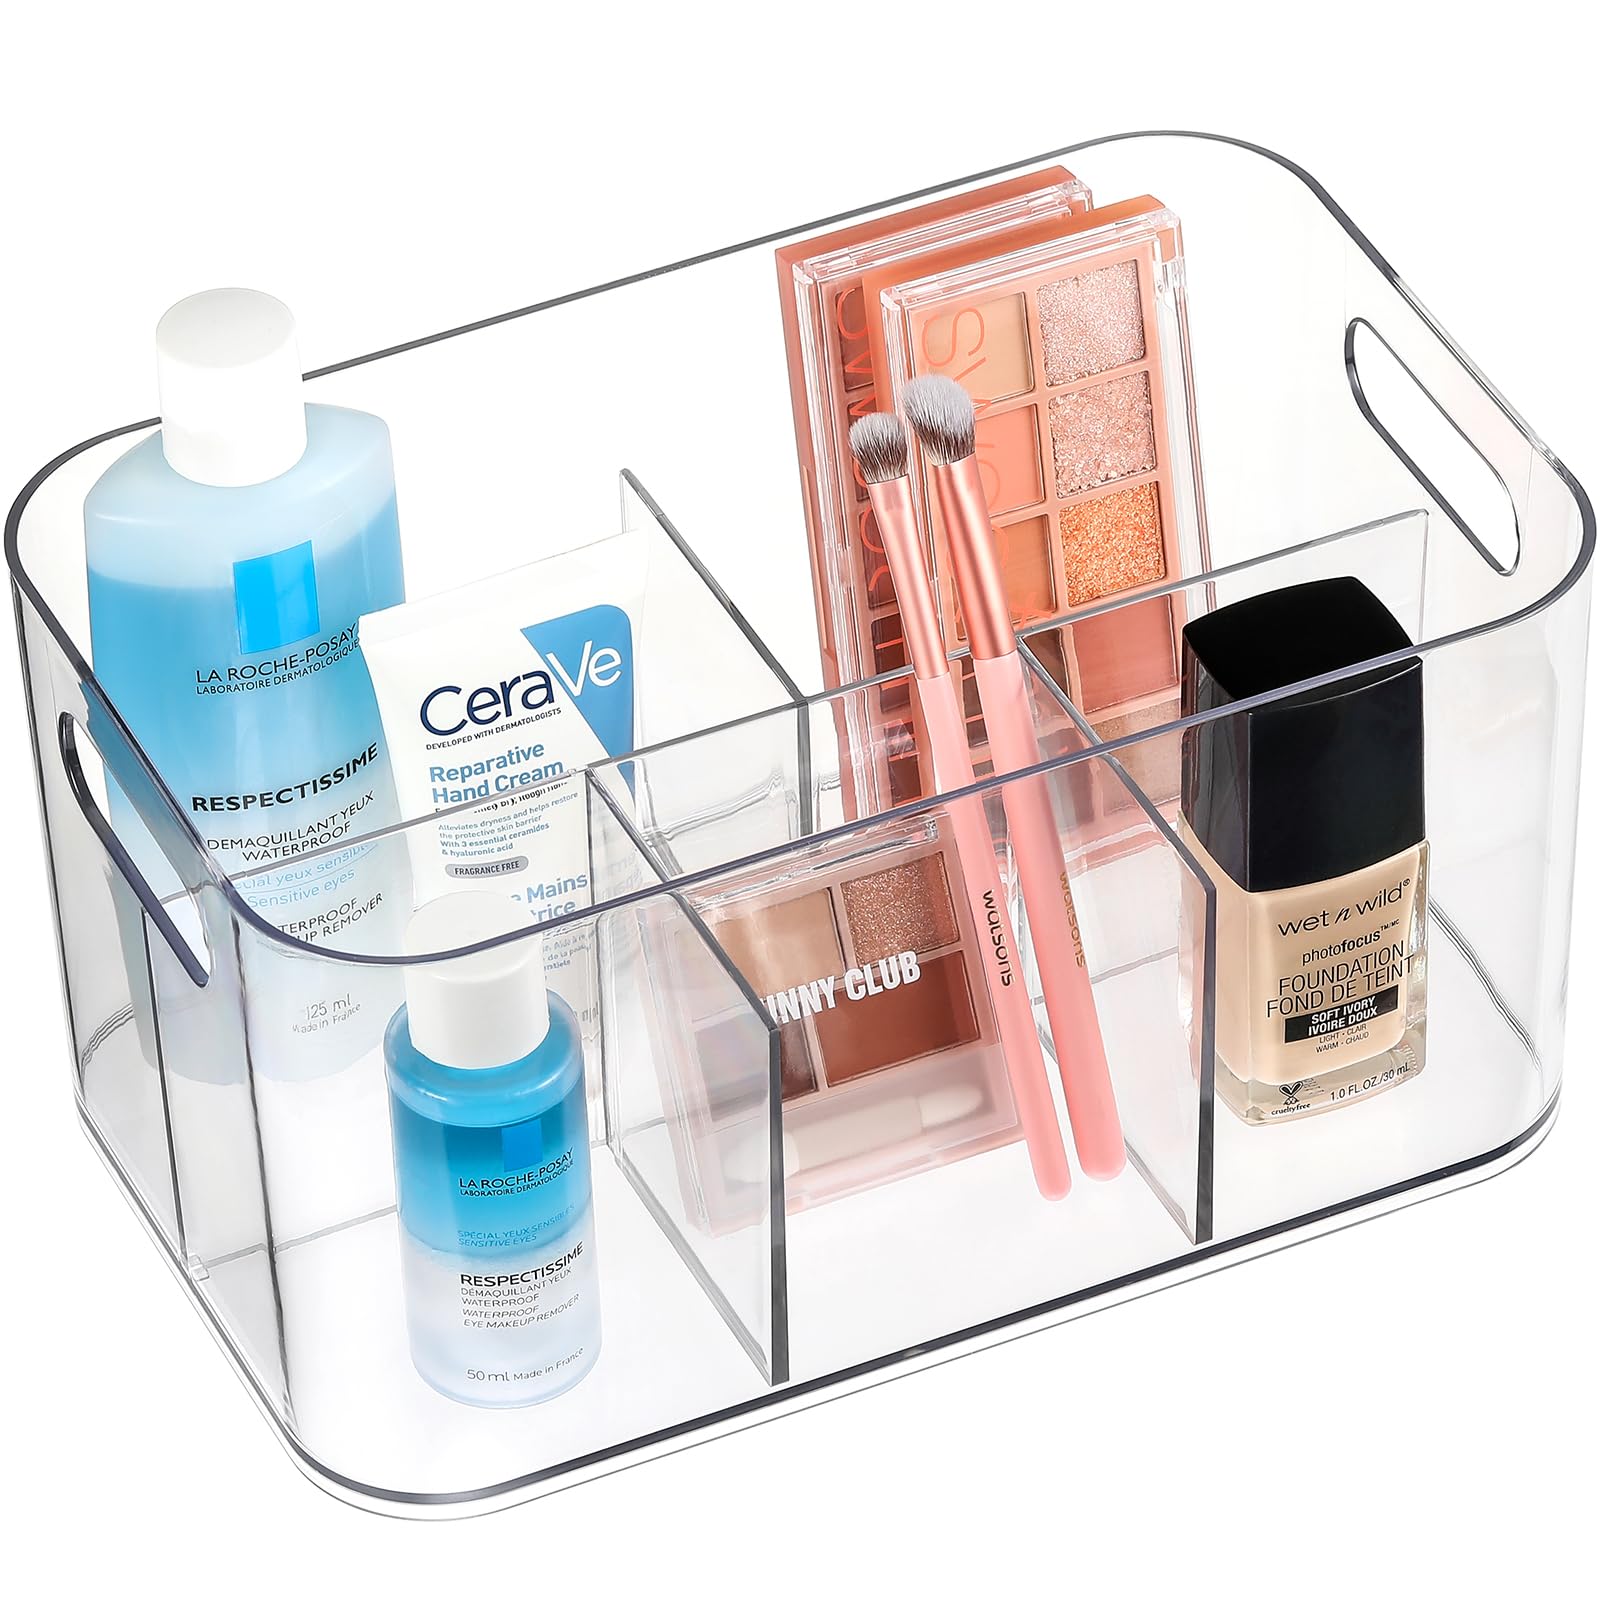 2 Pack, 5-Compartment Clear Plastic Bin - Divided Cosmetic Makeup Caddy Organizer - Multiuse Storage Container for Vanity, Bathroom, Kitchen, Pantry, Office, Craft, Utensil, Shower, Cleaning Items